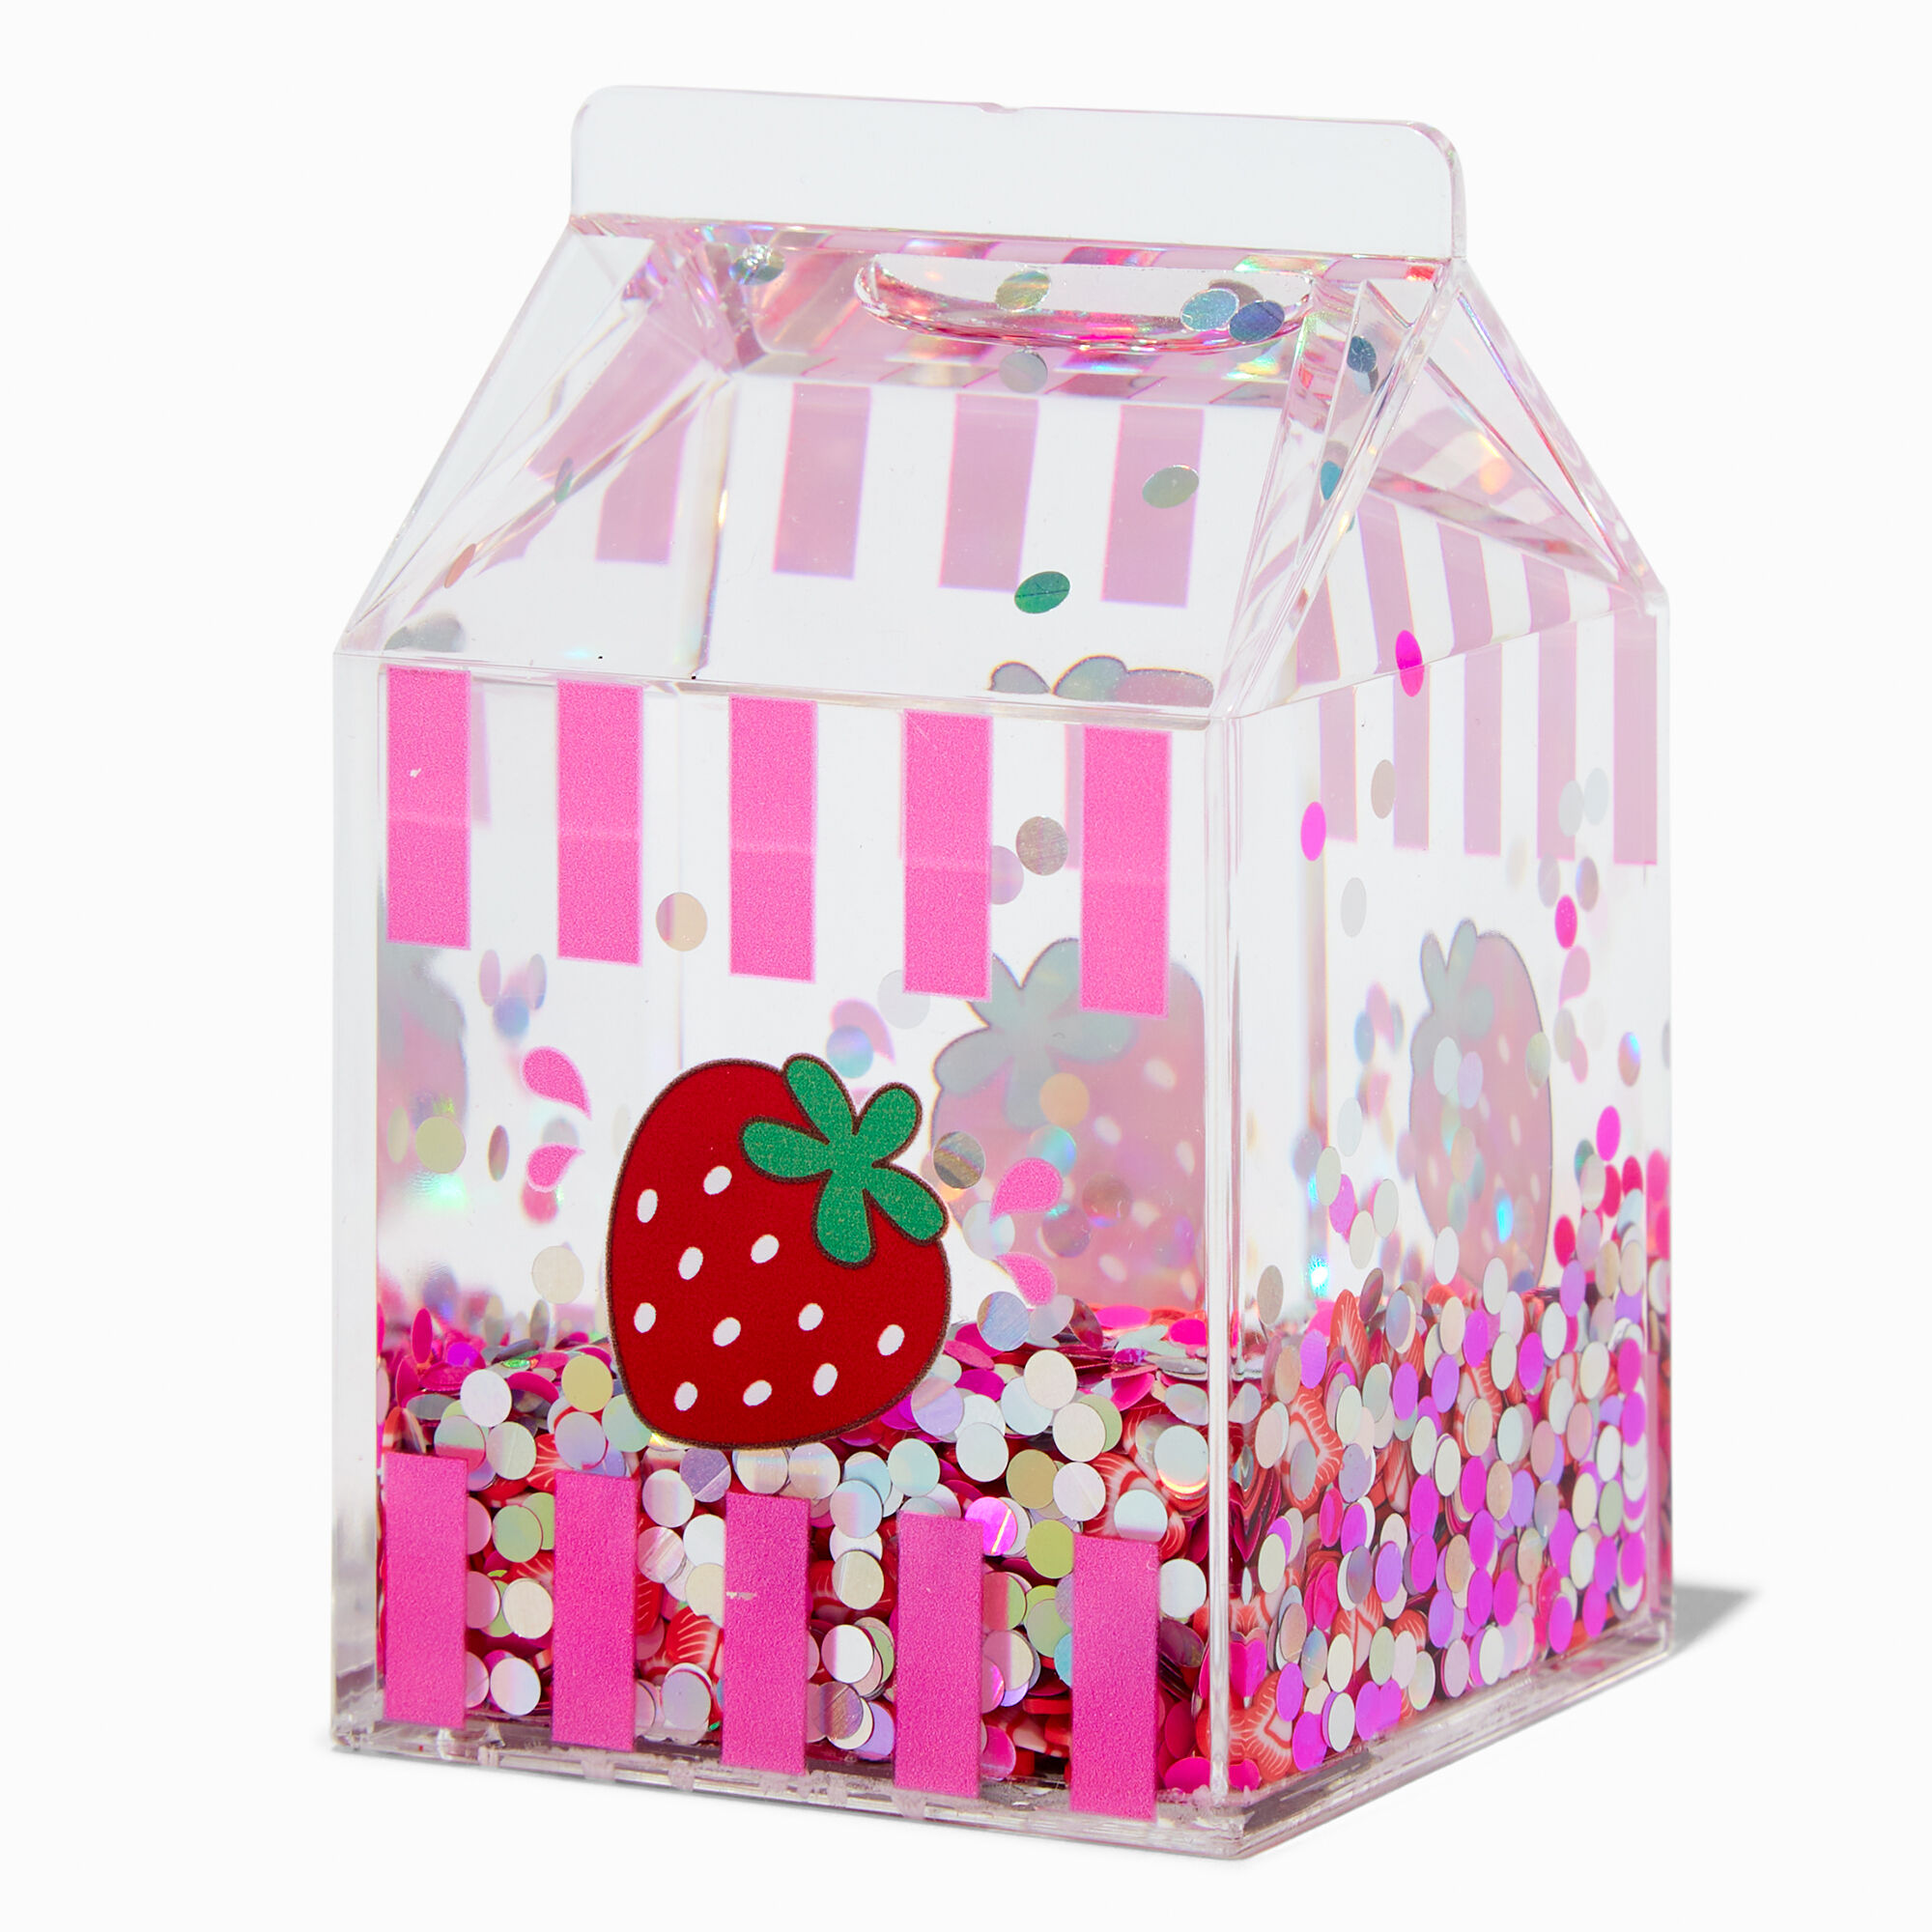 View Claires Strawberry Milk Carton WaterFilled Decor information